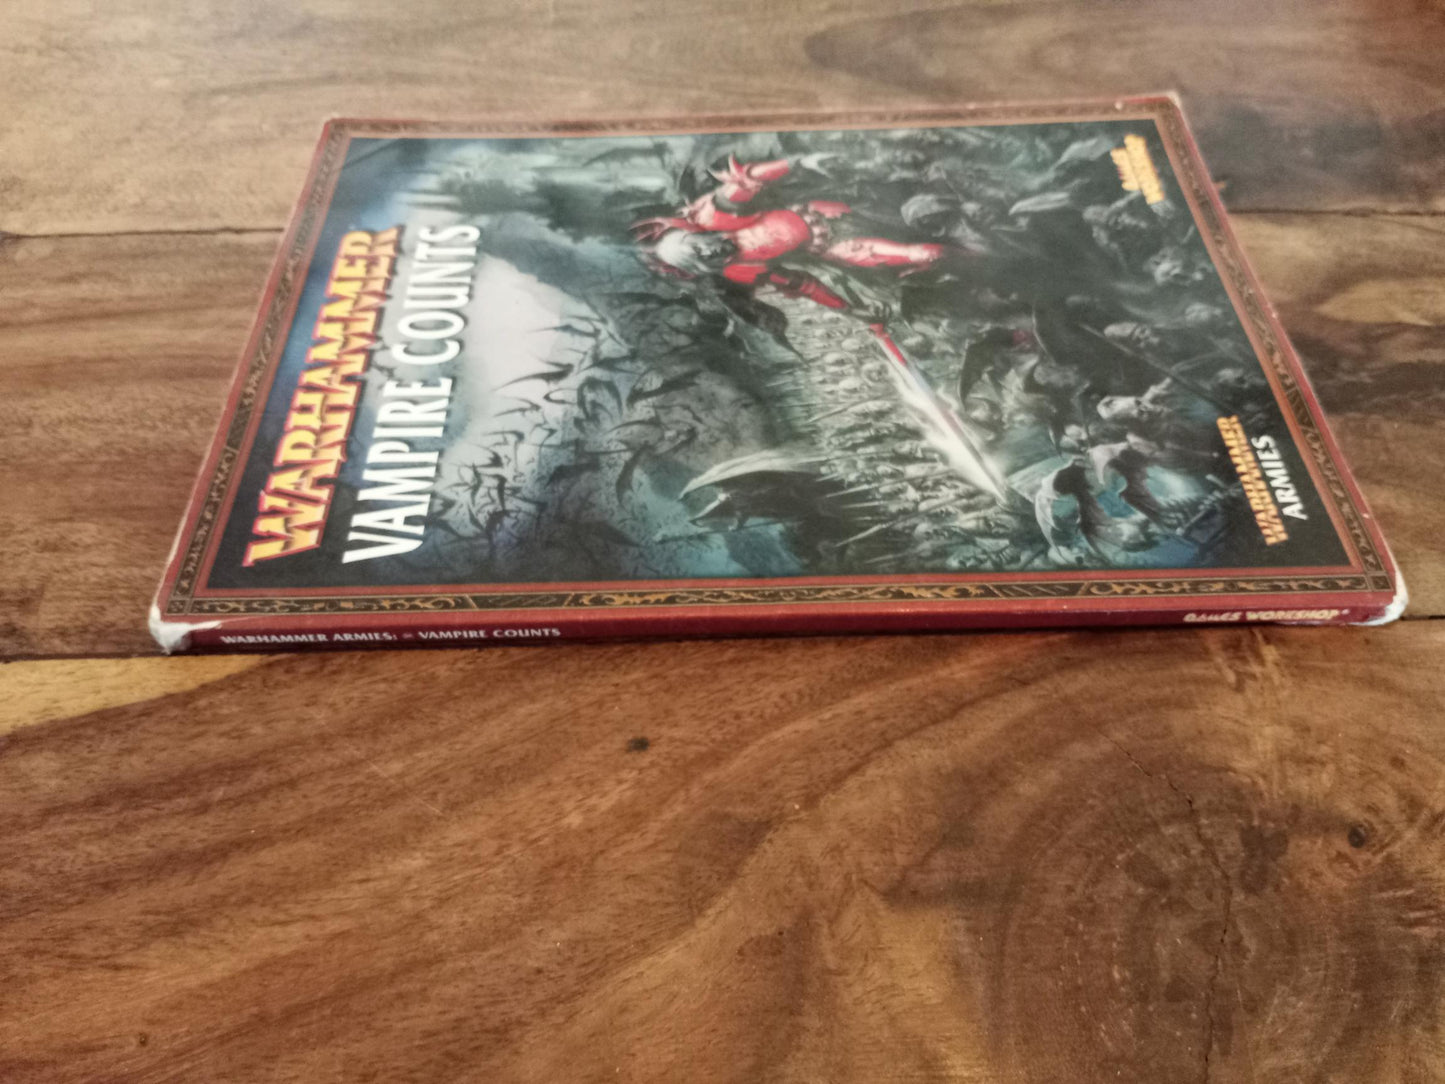 Warhammer Vampire Counts 7th Edition Army Book Games Workshop 2008